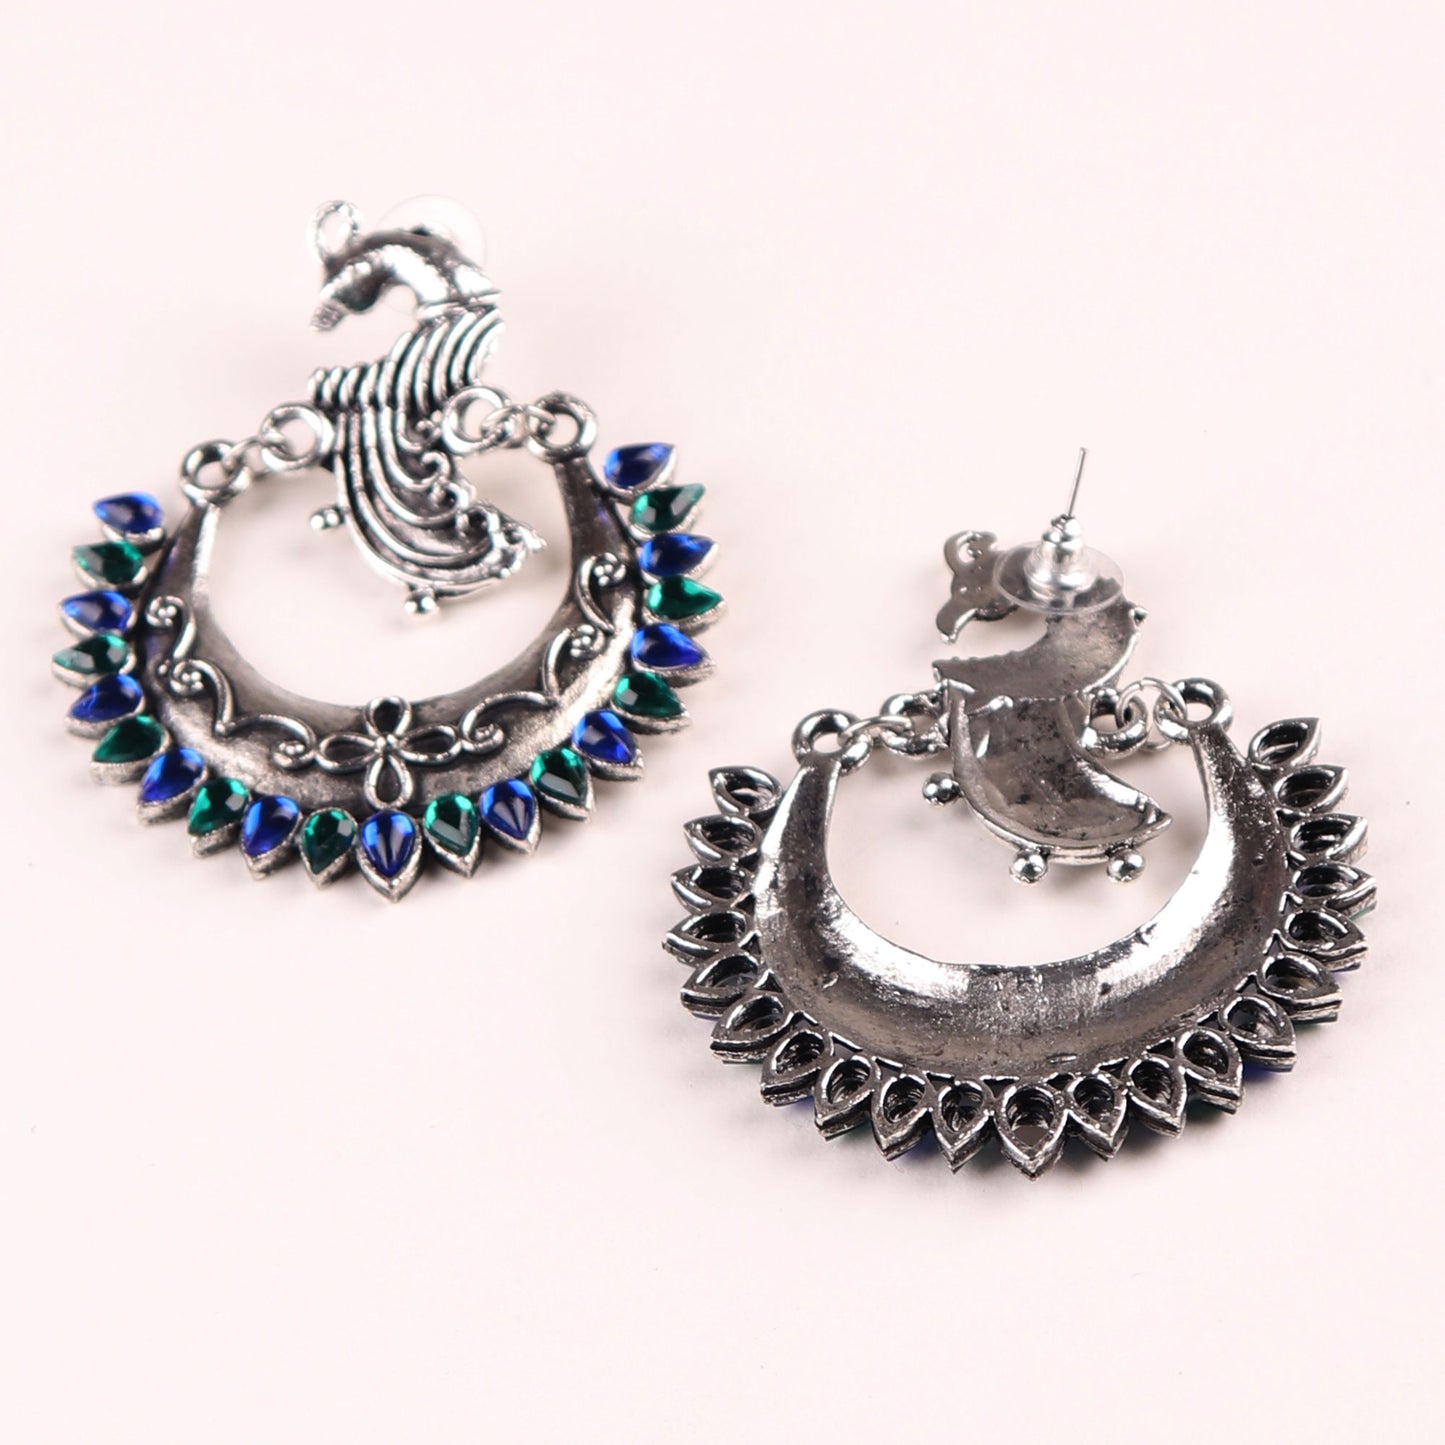 Earrings,The Peacock in the Moon in Midnight Blue & Turquoise - Cippele Multi Store